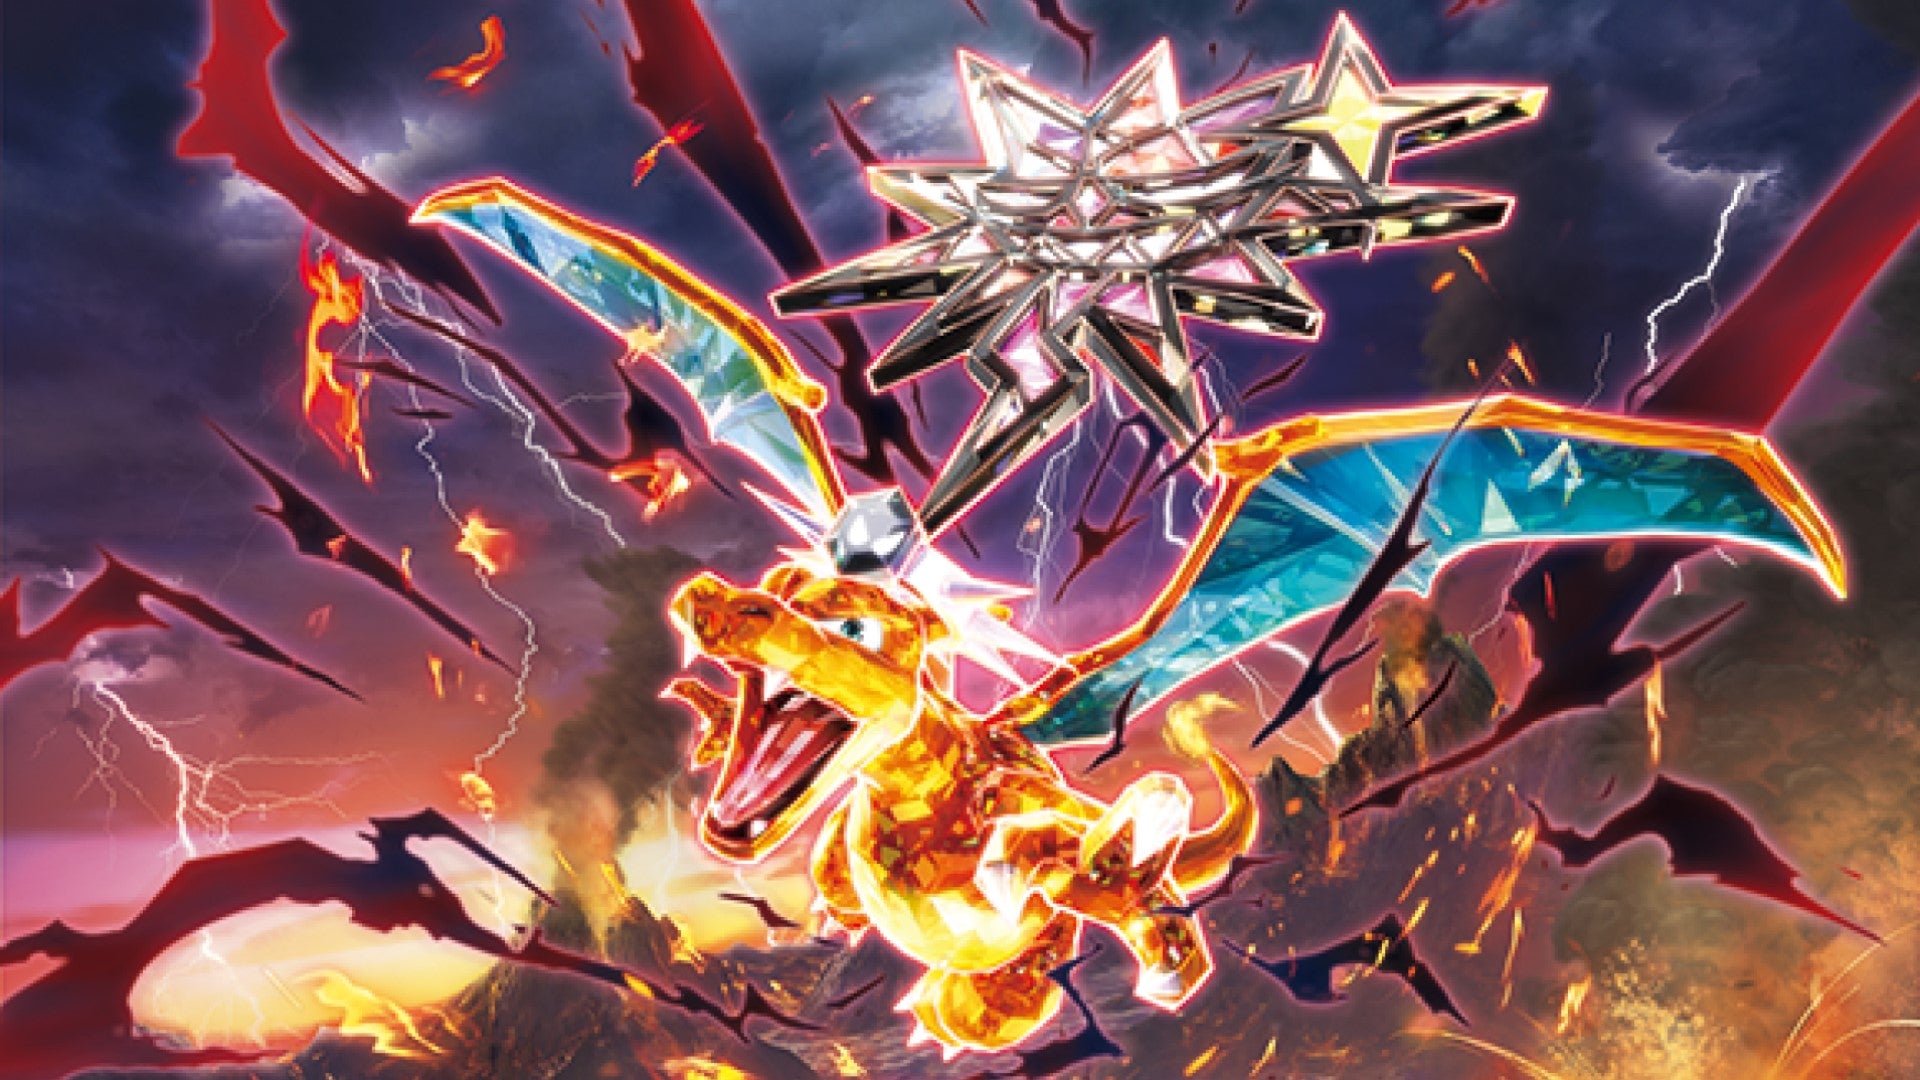 Dramatic image of Charizard from the Pokémon Scarlet and Violet Obsidian Flames release, with its iconic fiery wings spread wide, exuding a powerful aura indicative of its new powers of darkness, symbolizing the intense energy of the Obsidian Flames expansion.